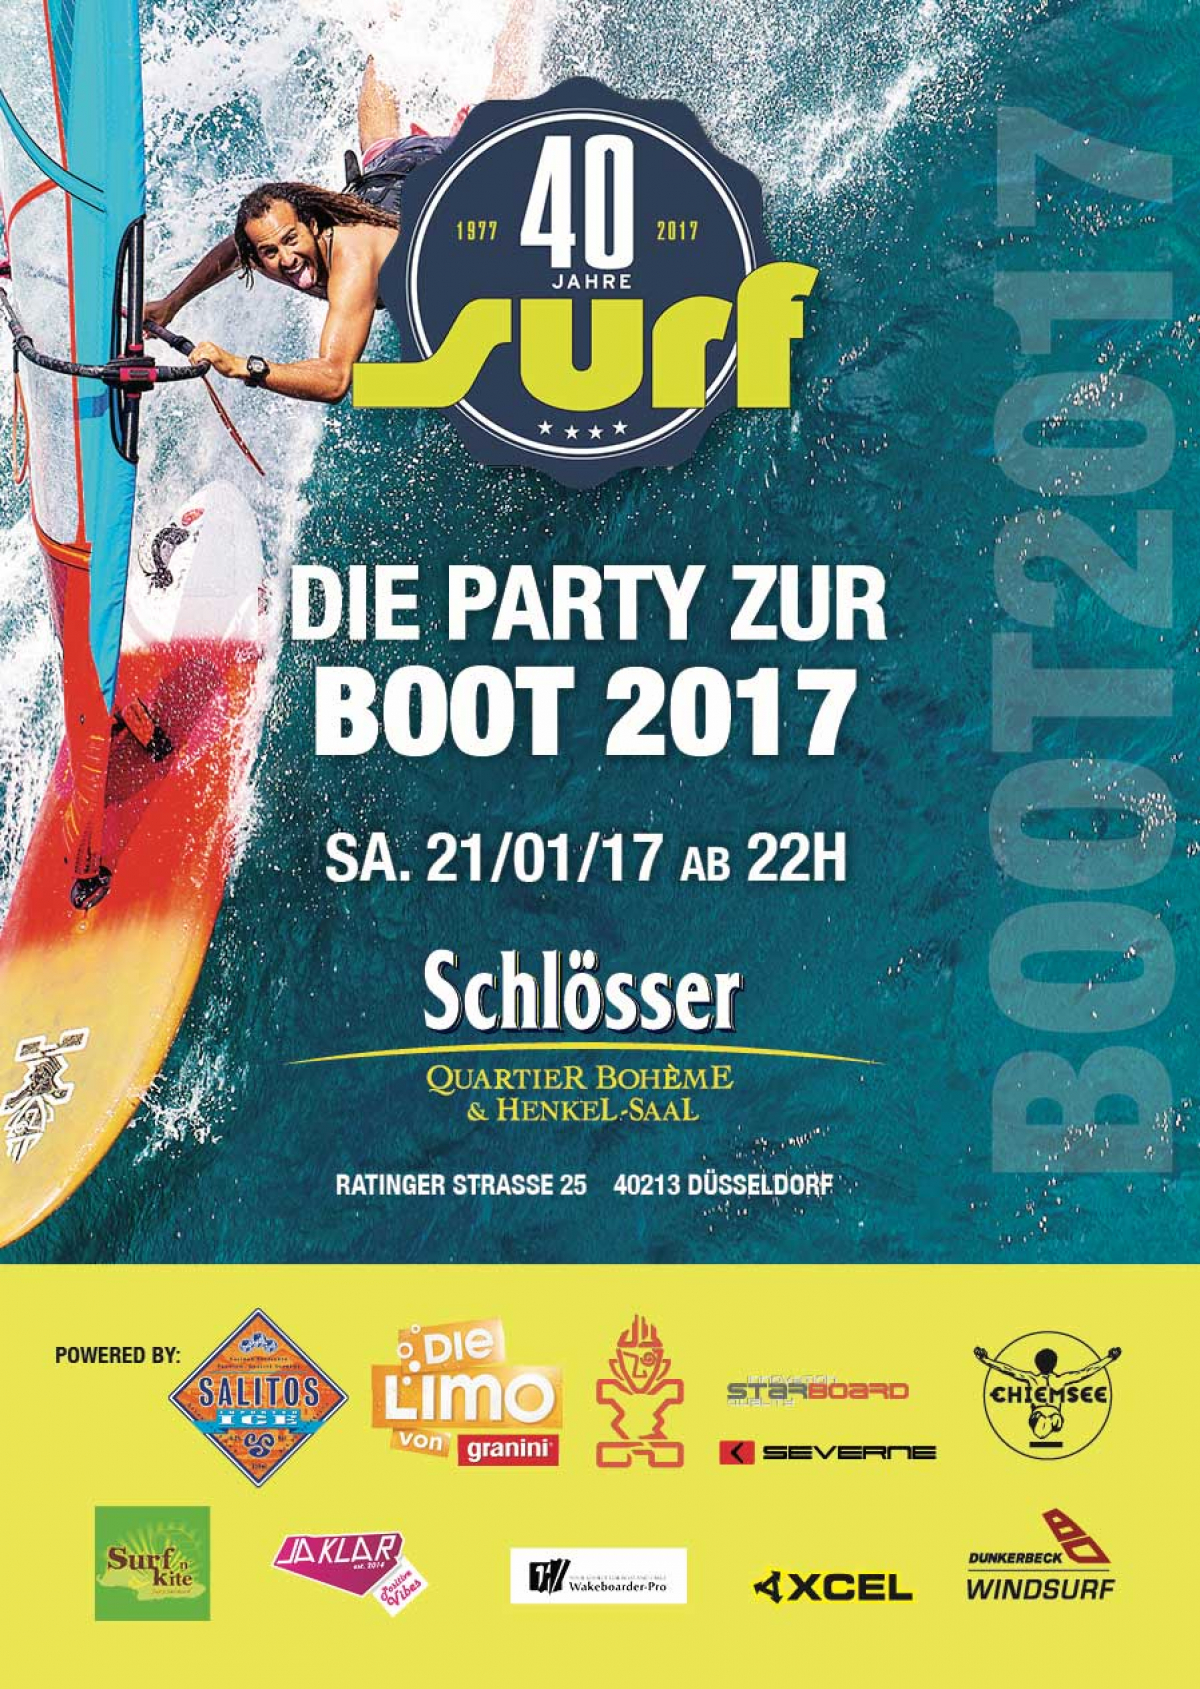 boot 2017 - Party